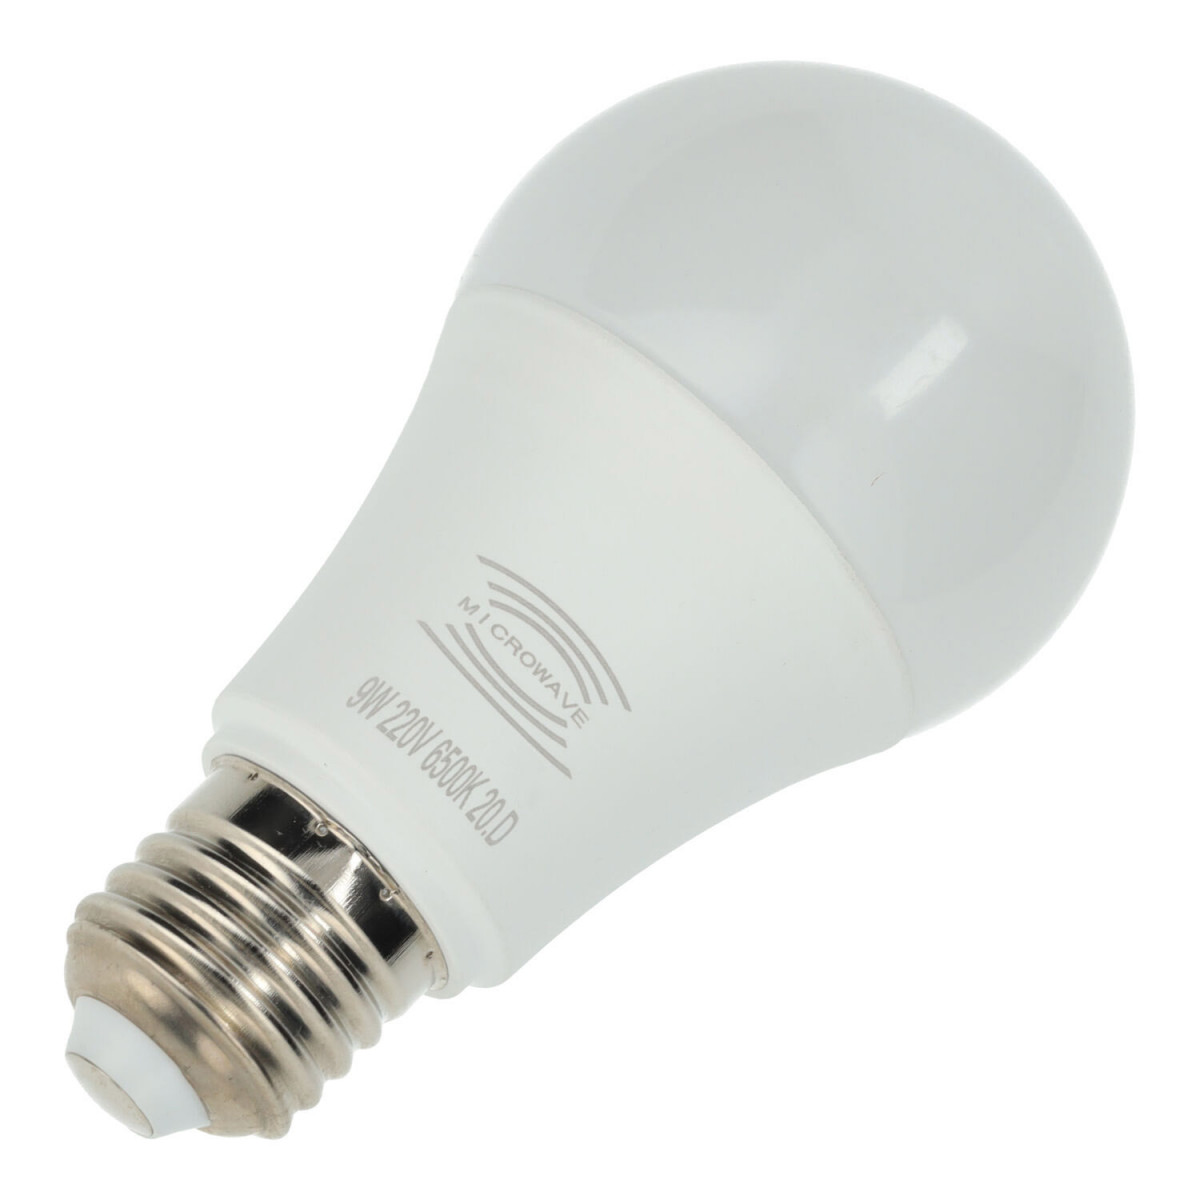 sphere 10W bulbs, warm white and cool white light, 850 lumens